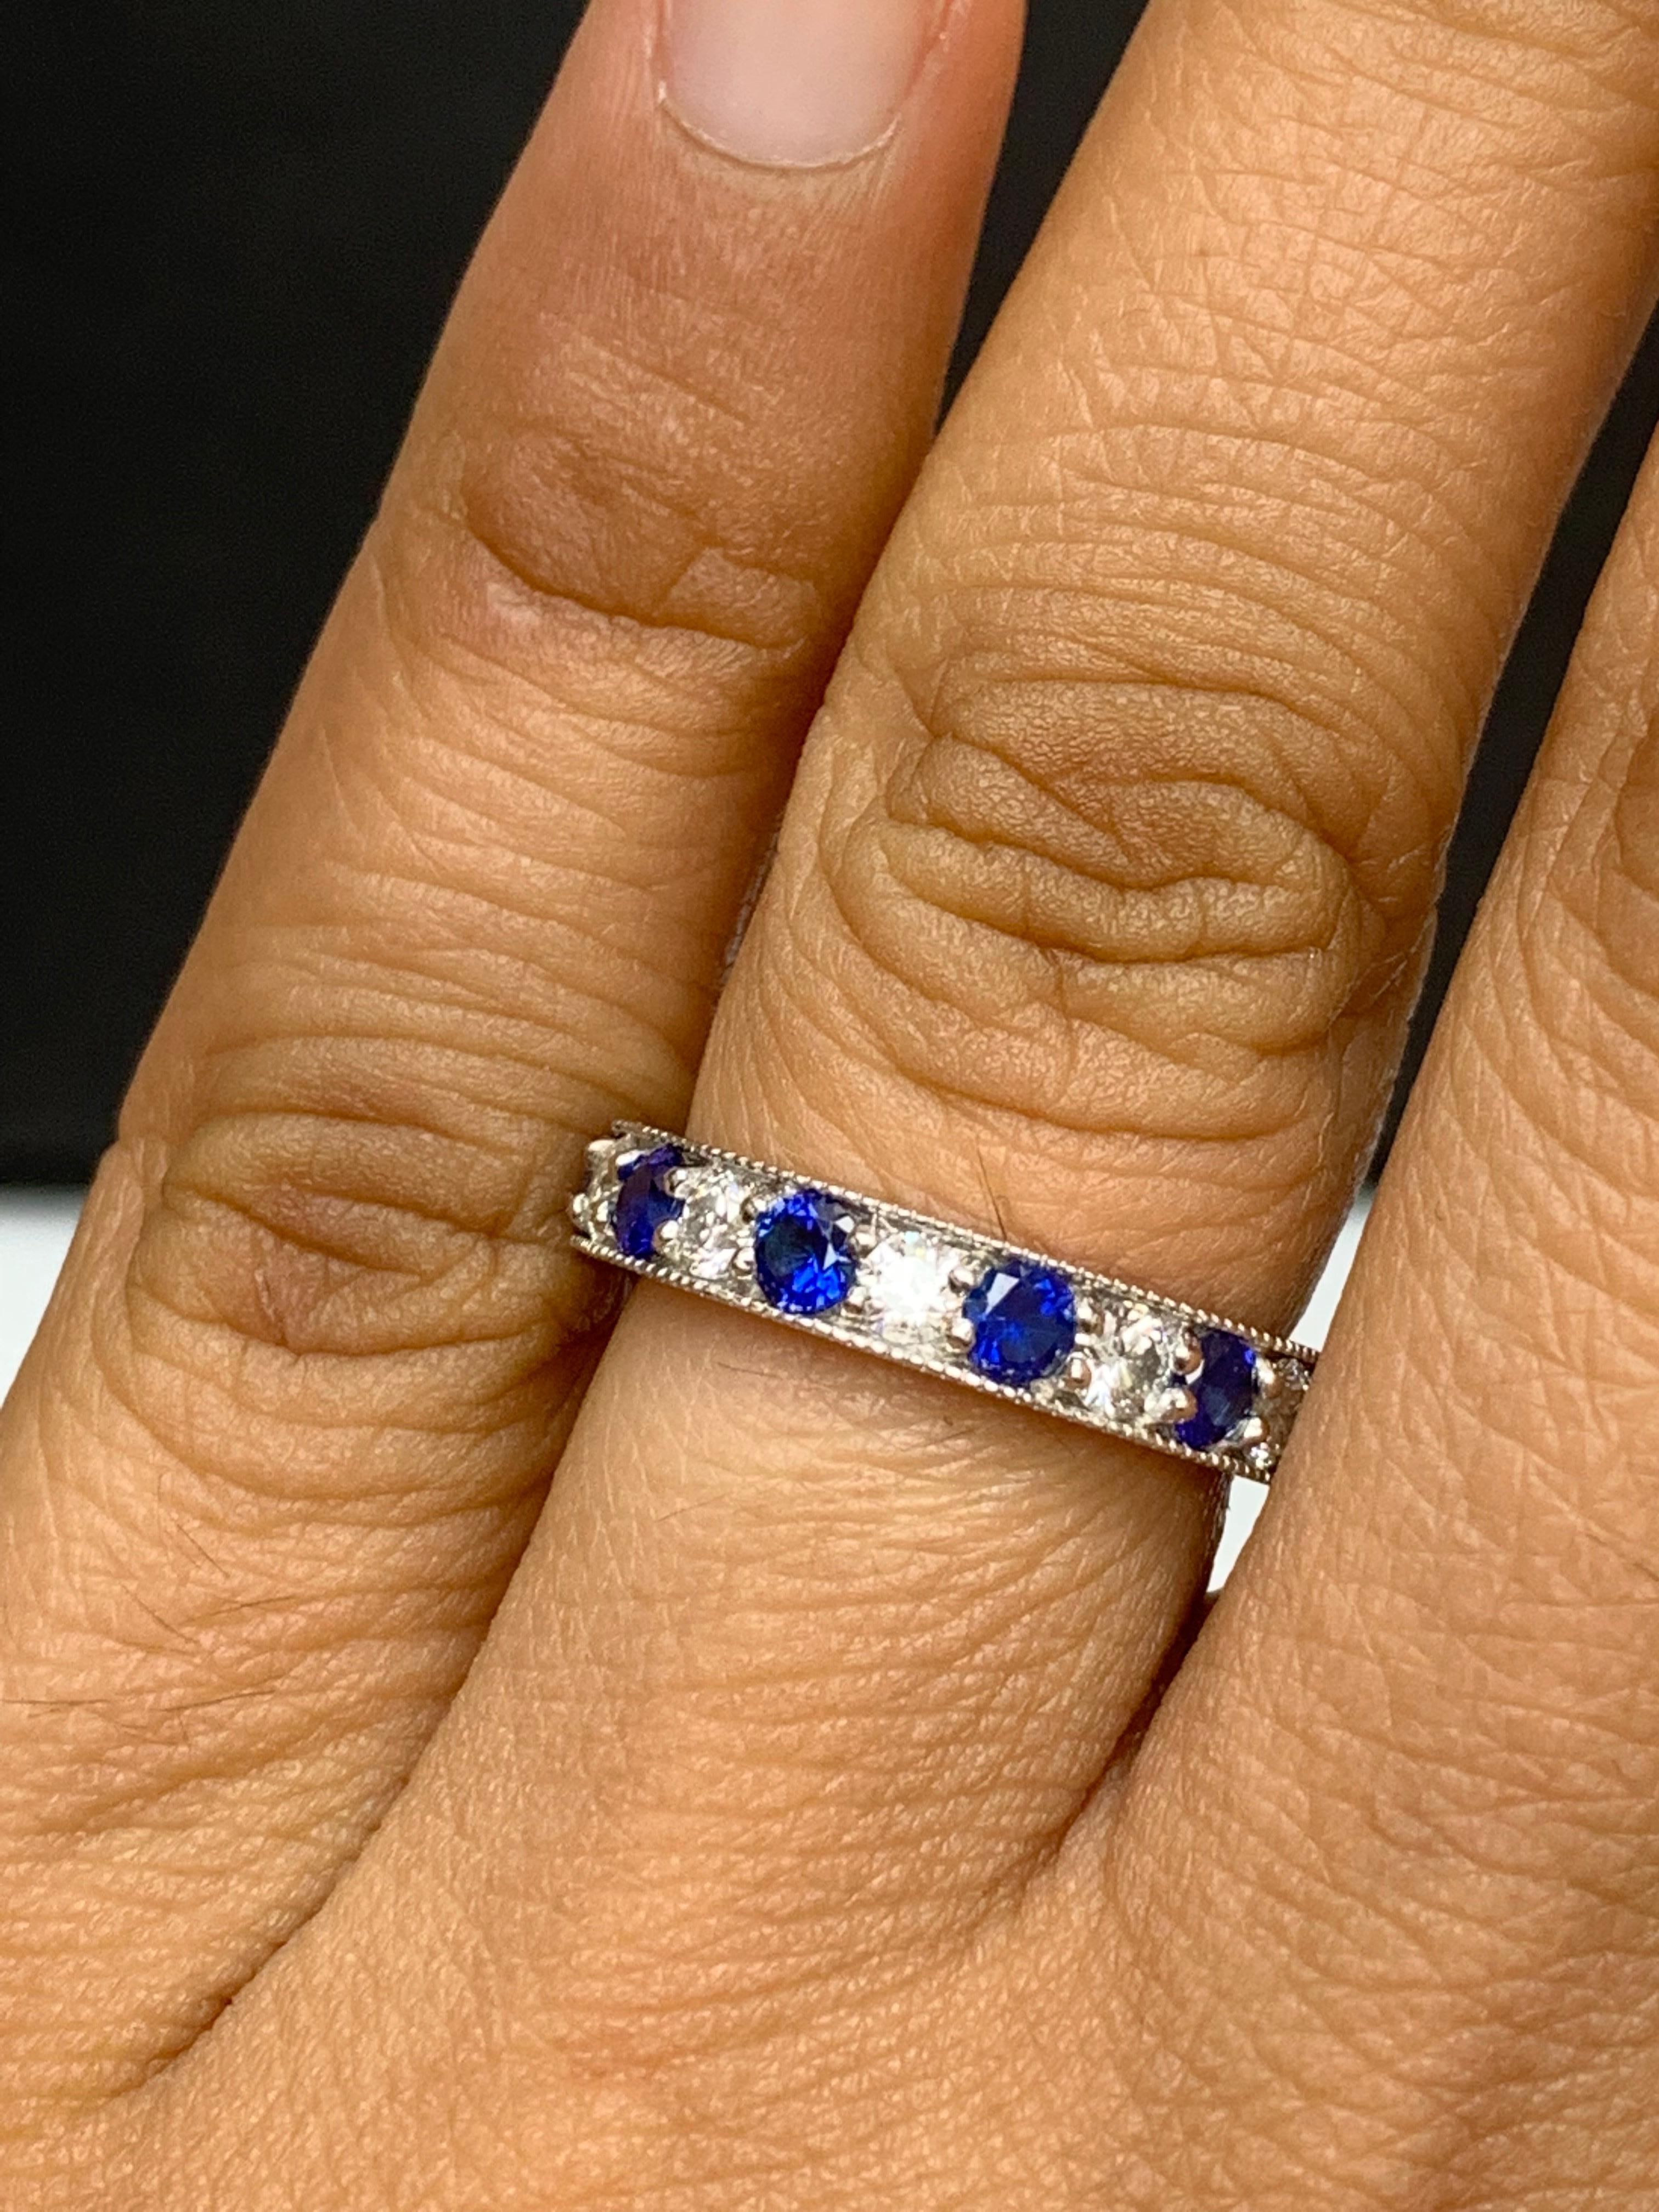 Handcrafted to perfection; showcasing color-rich brilliant-cut blue sapphires that elegantly alternate brilliant-cut diamonds in a 14k white gold setting. 
The 6 Blue Sapphires weigh 0.80 carats total and 5 diamonds weigh 0.50 carats total.

Size